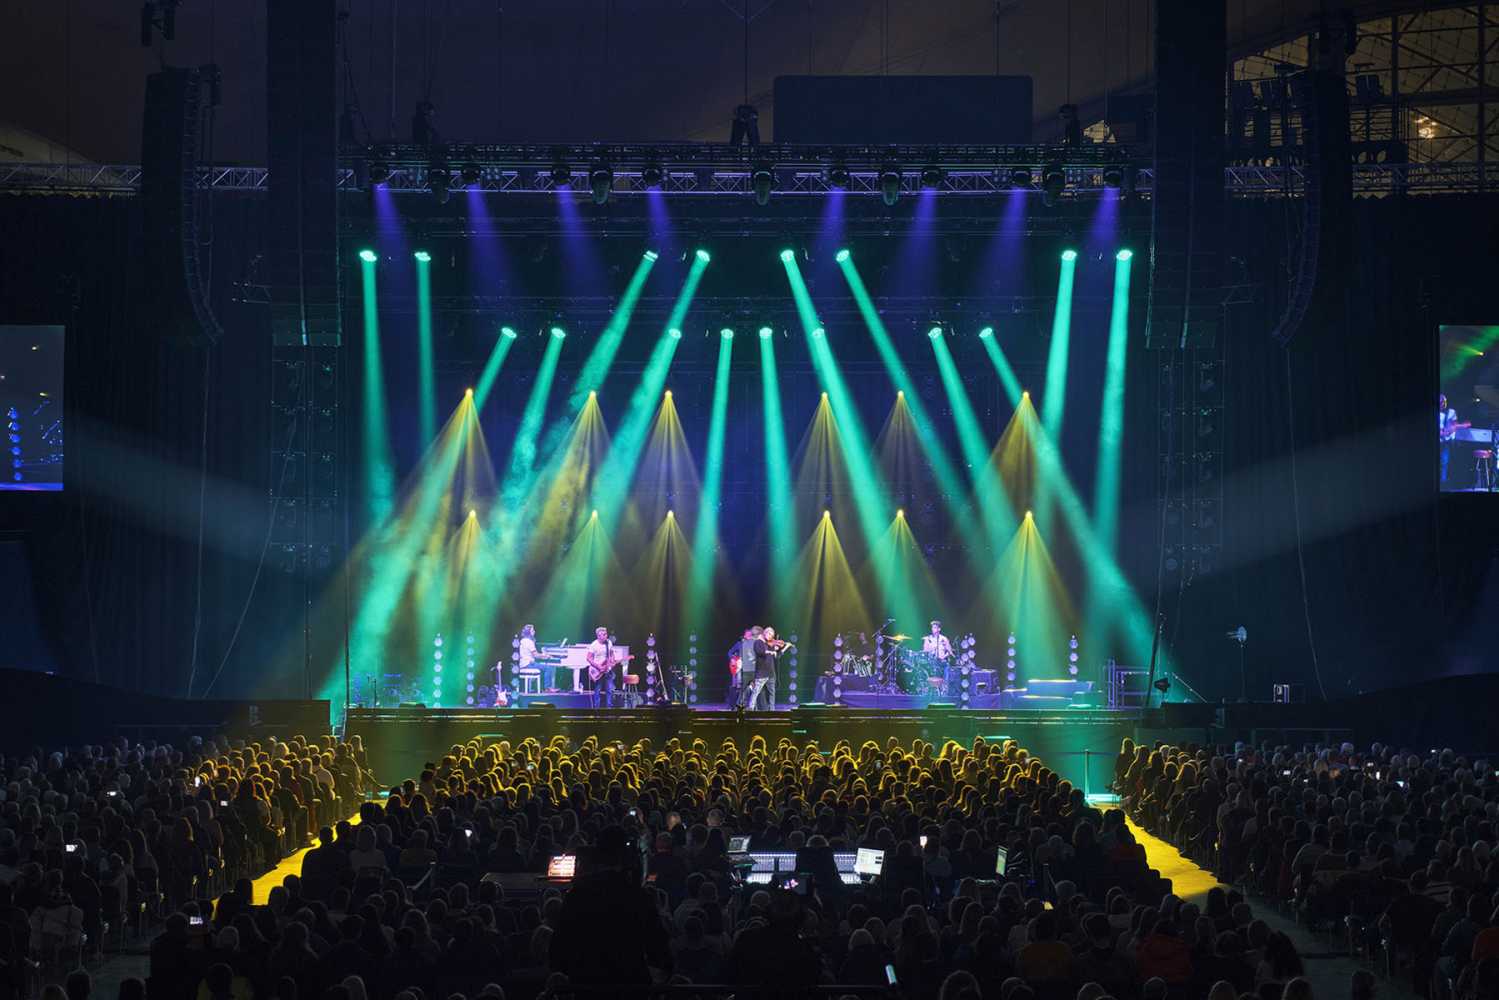 Equipment for the bulk of the European tour was supplied by rental company Black Box from Berlin (photo: Philipp Klak)